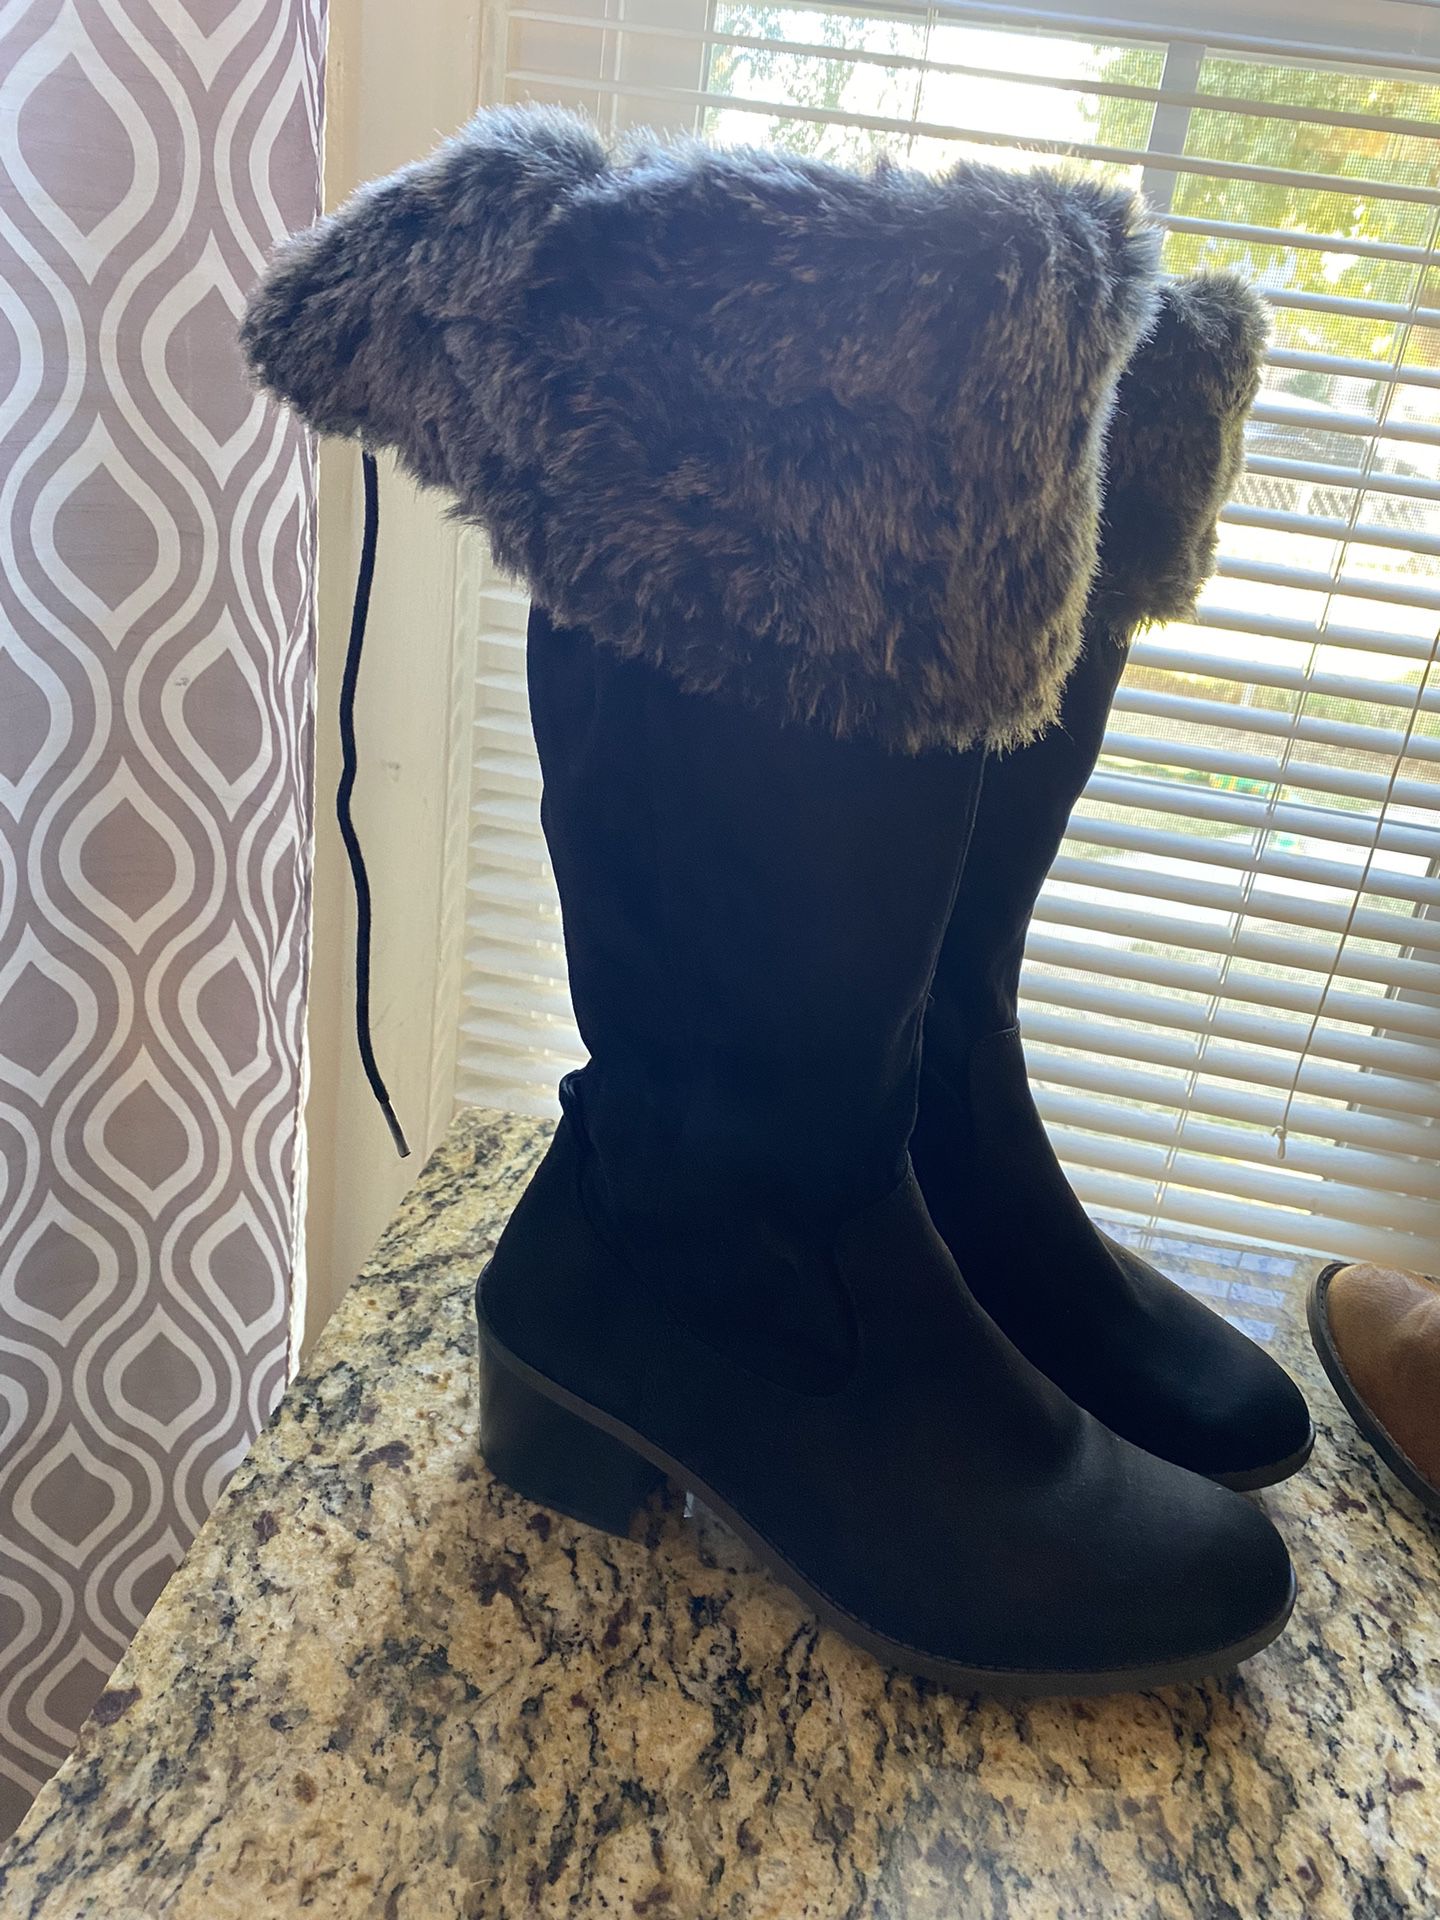 Black Fur Boots Very Good Condition Size 11 Reduced Size To A 10